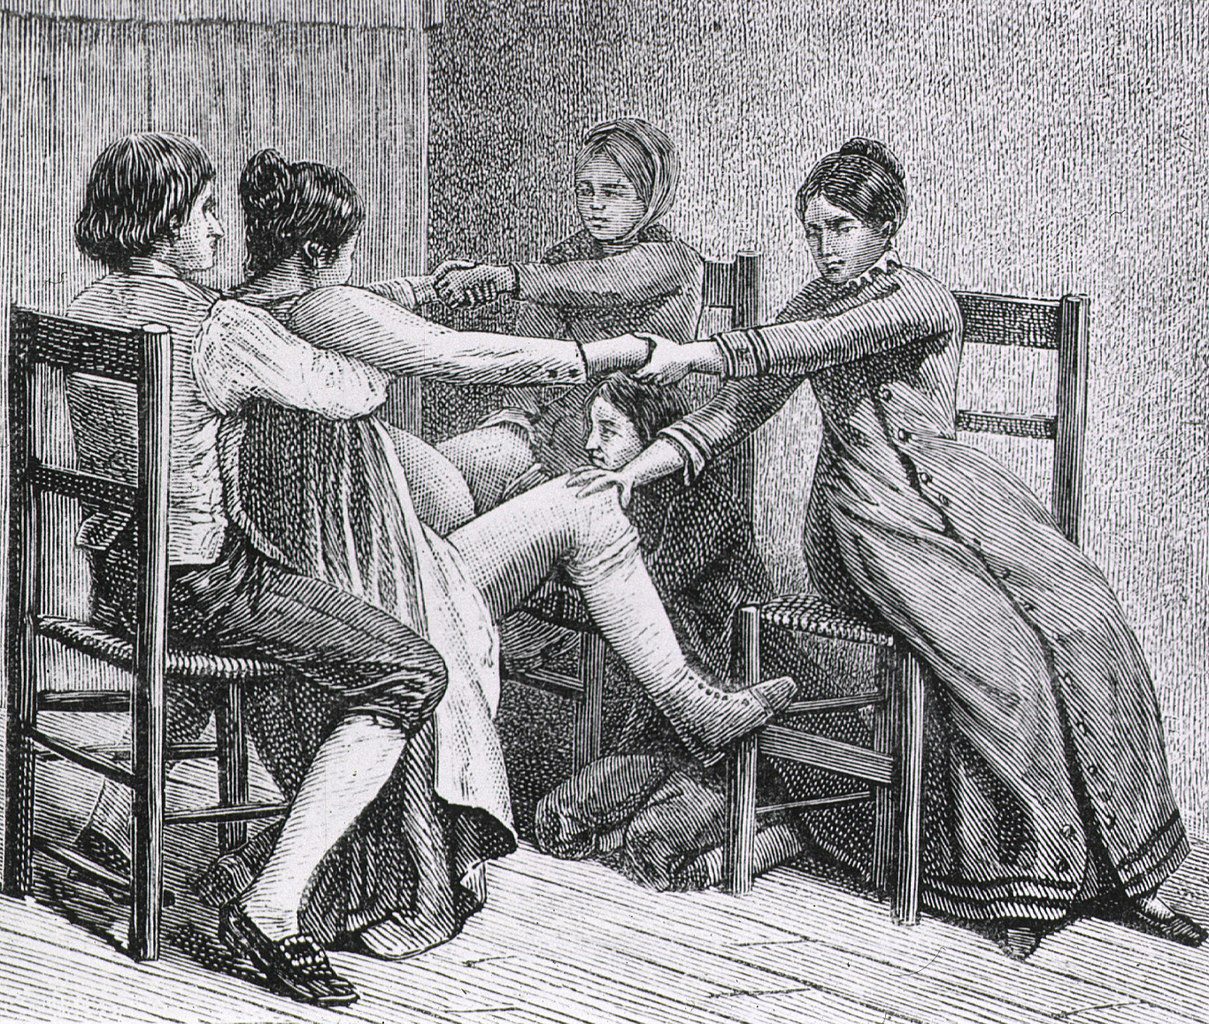 Two women and two men assist during childbirth. (Image: Wikimedia/National Library of Medicine/Gustave Joseph Witkowski)